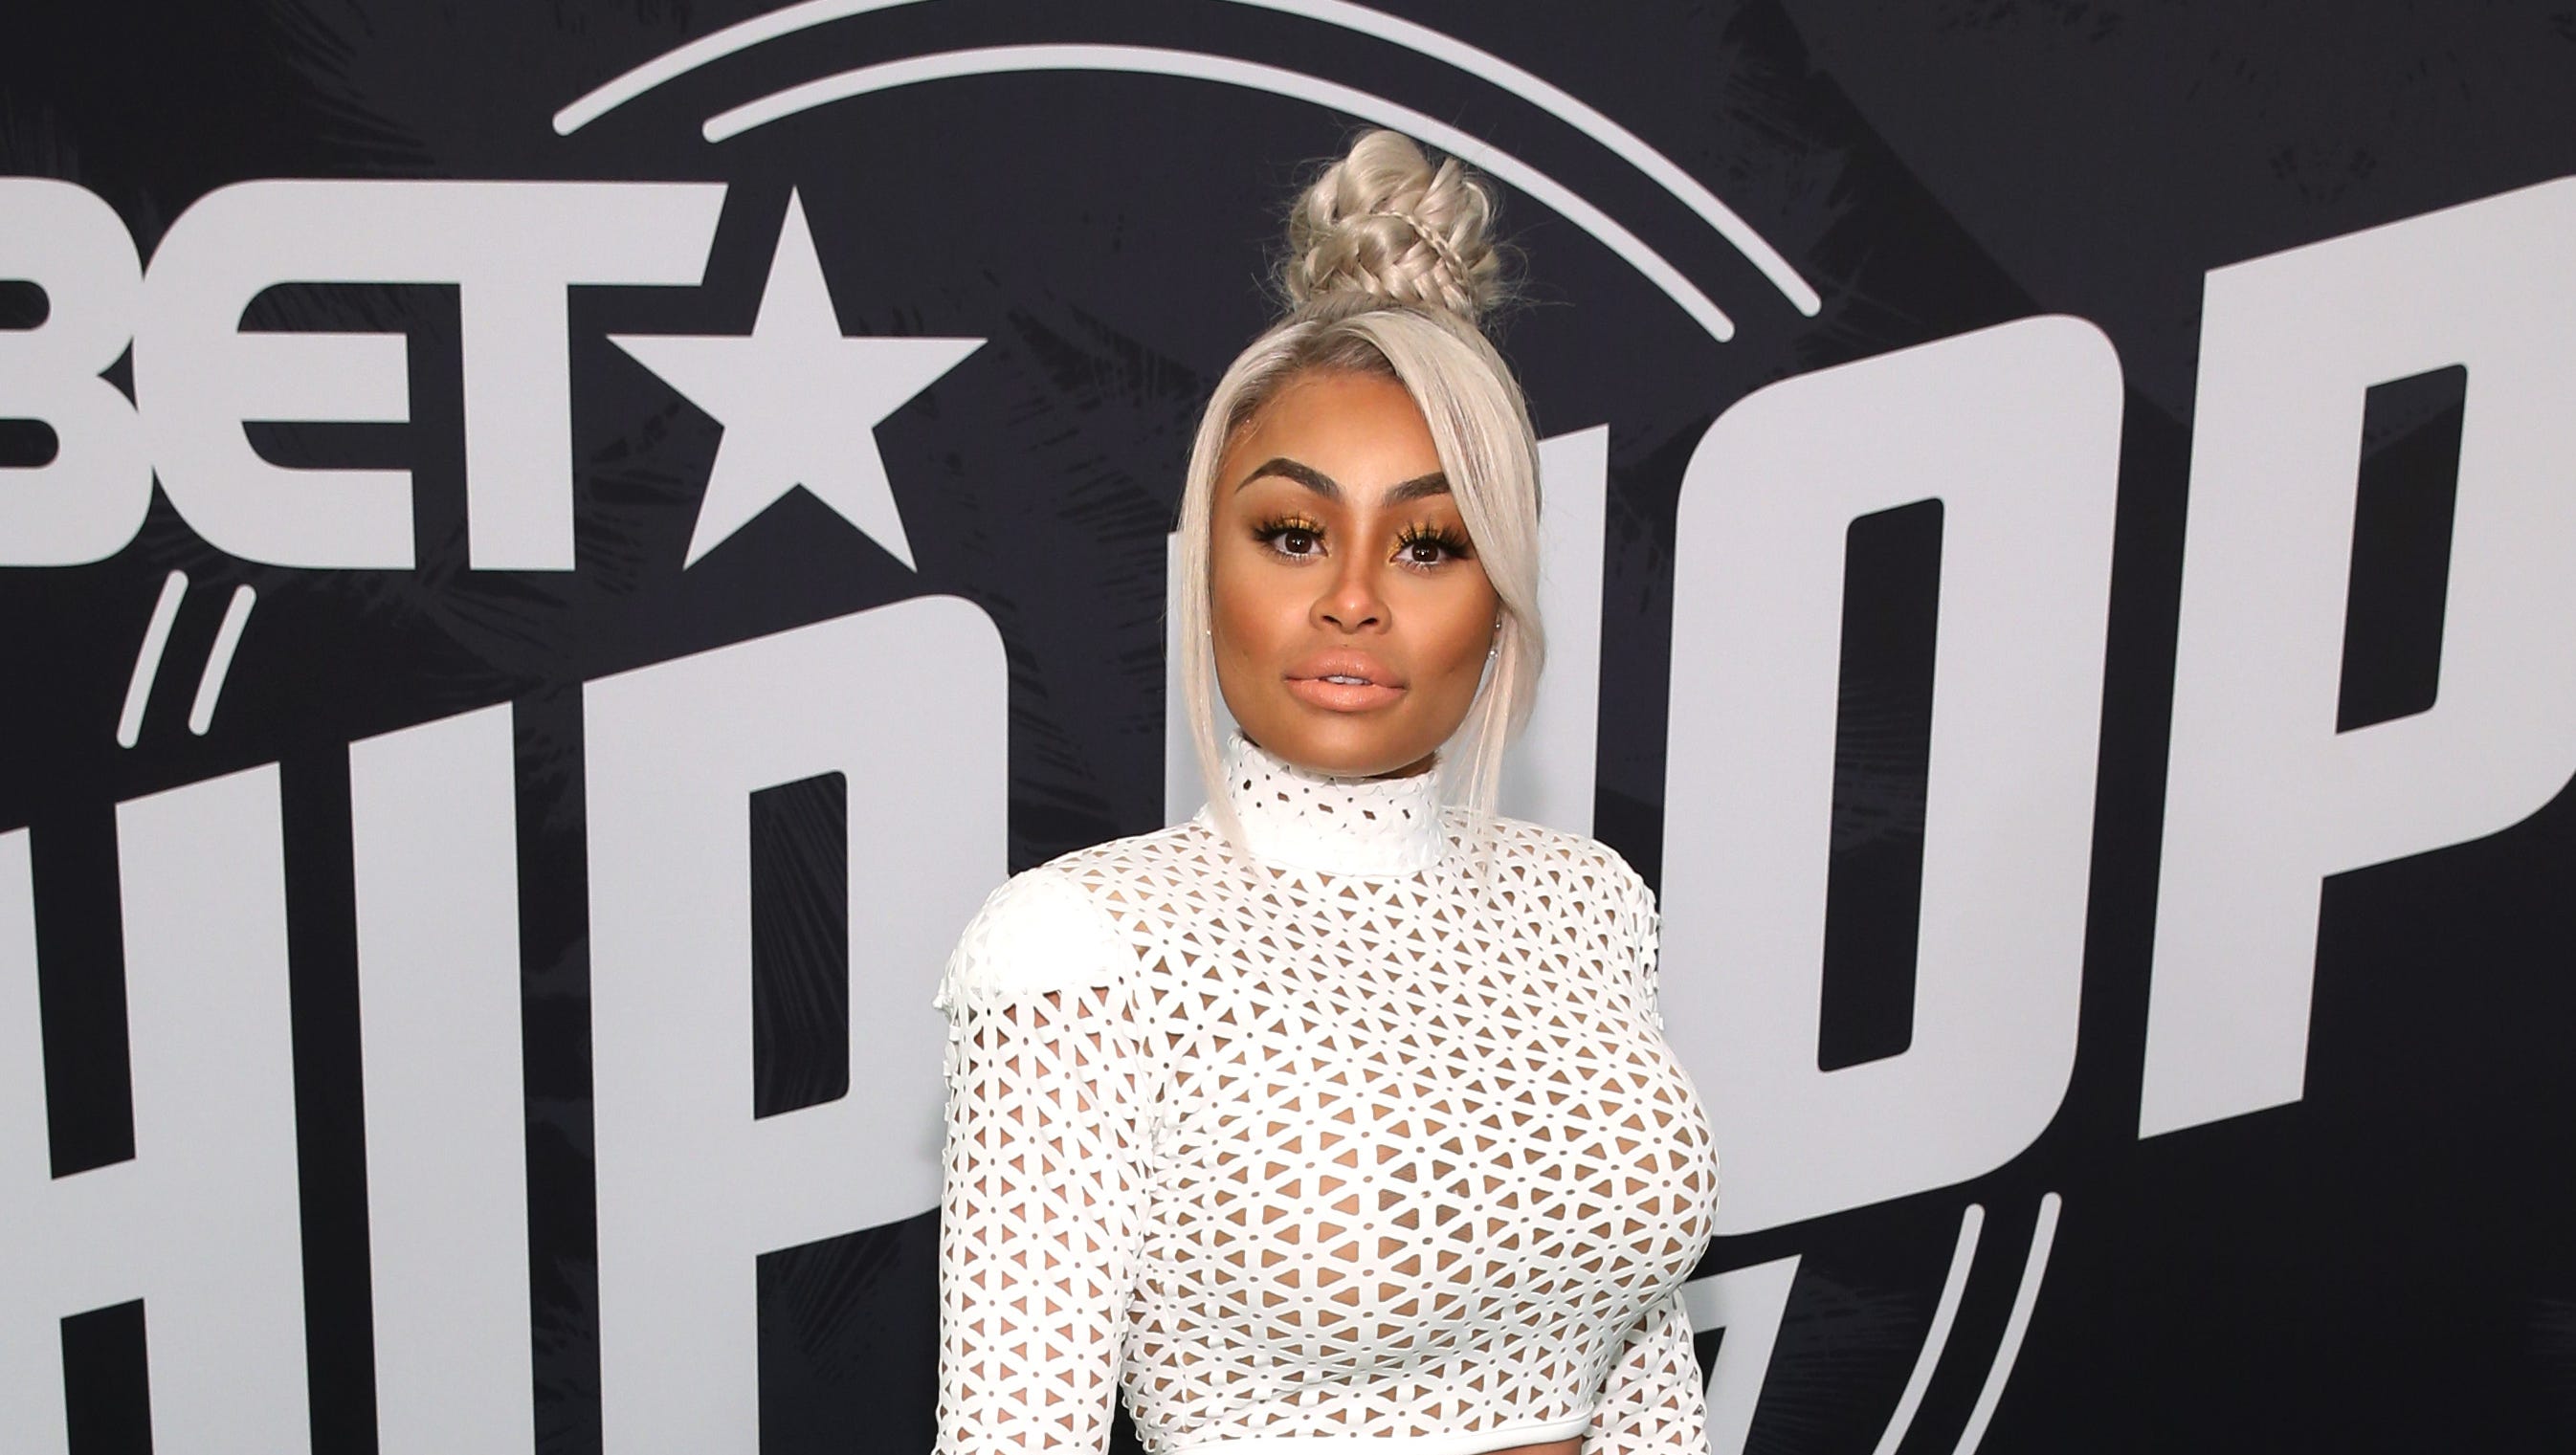 Chyna Oral Porn - Blac Chyna will ask police to investigate leaked sex tape